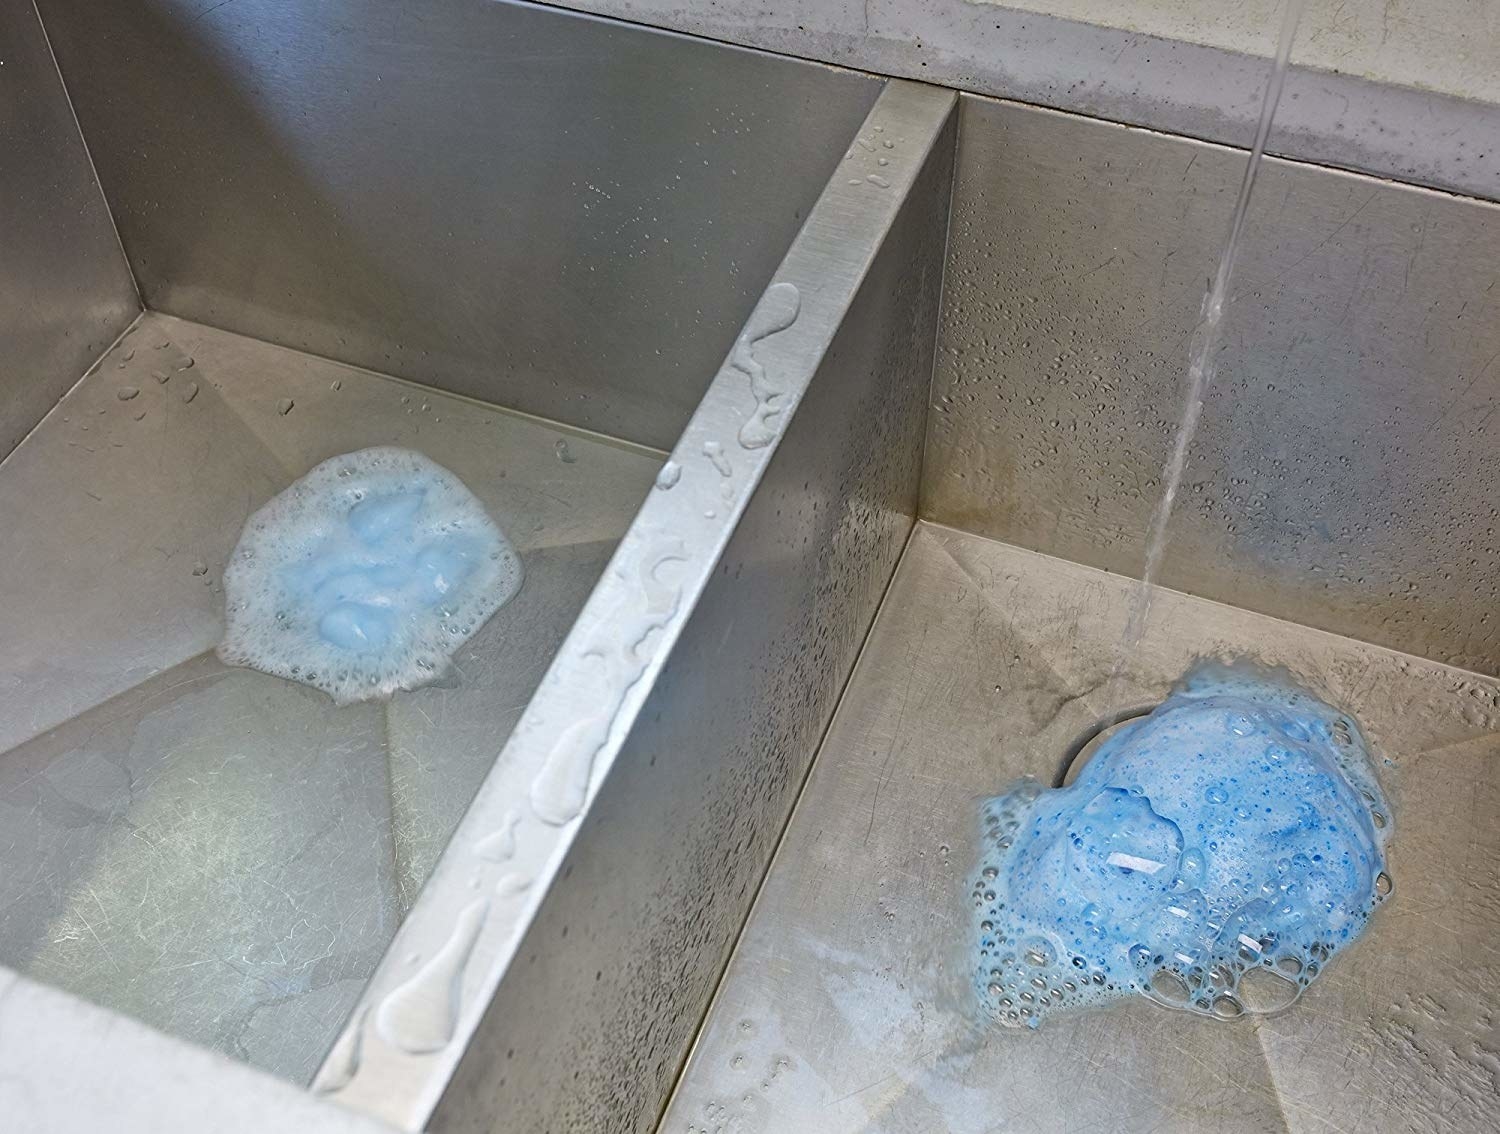 A drain with blue foaming bubbles inside